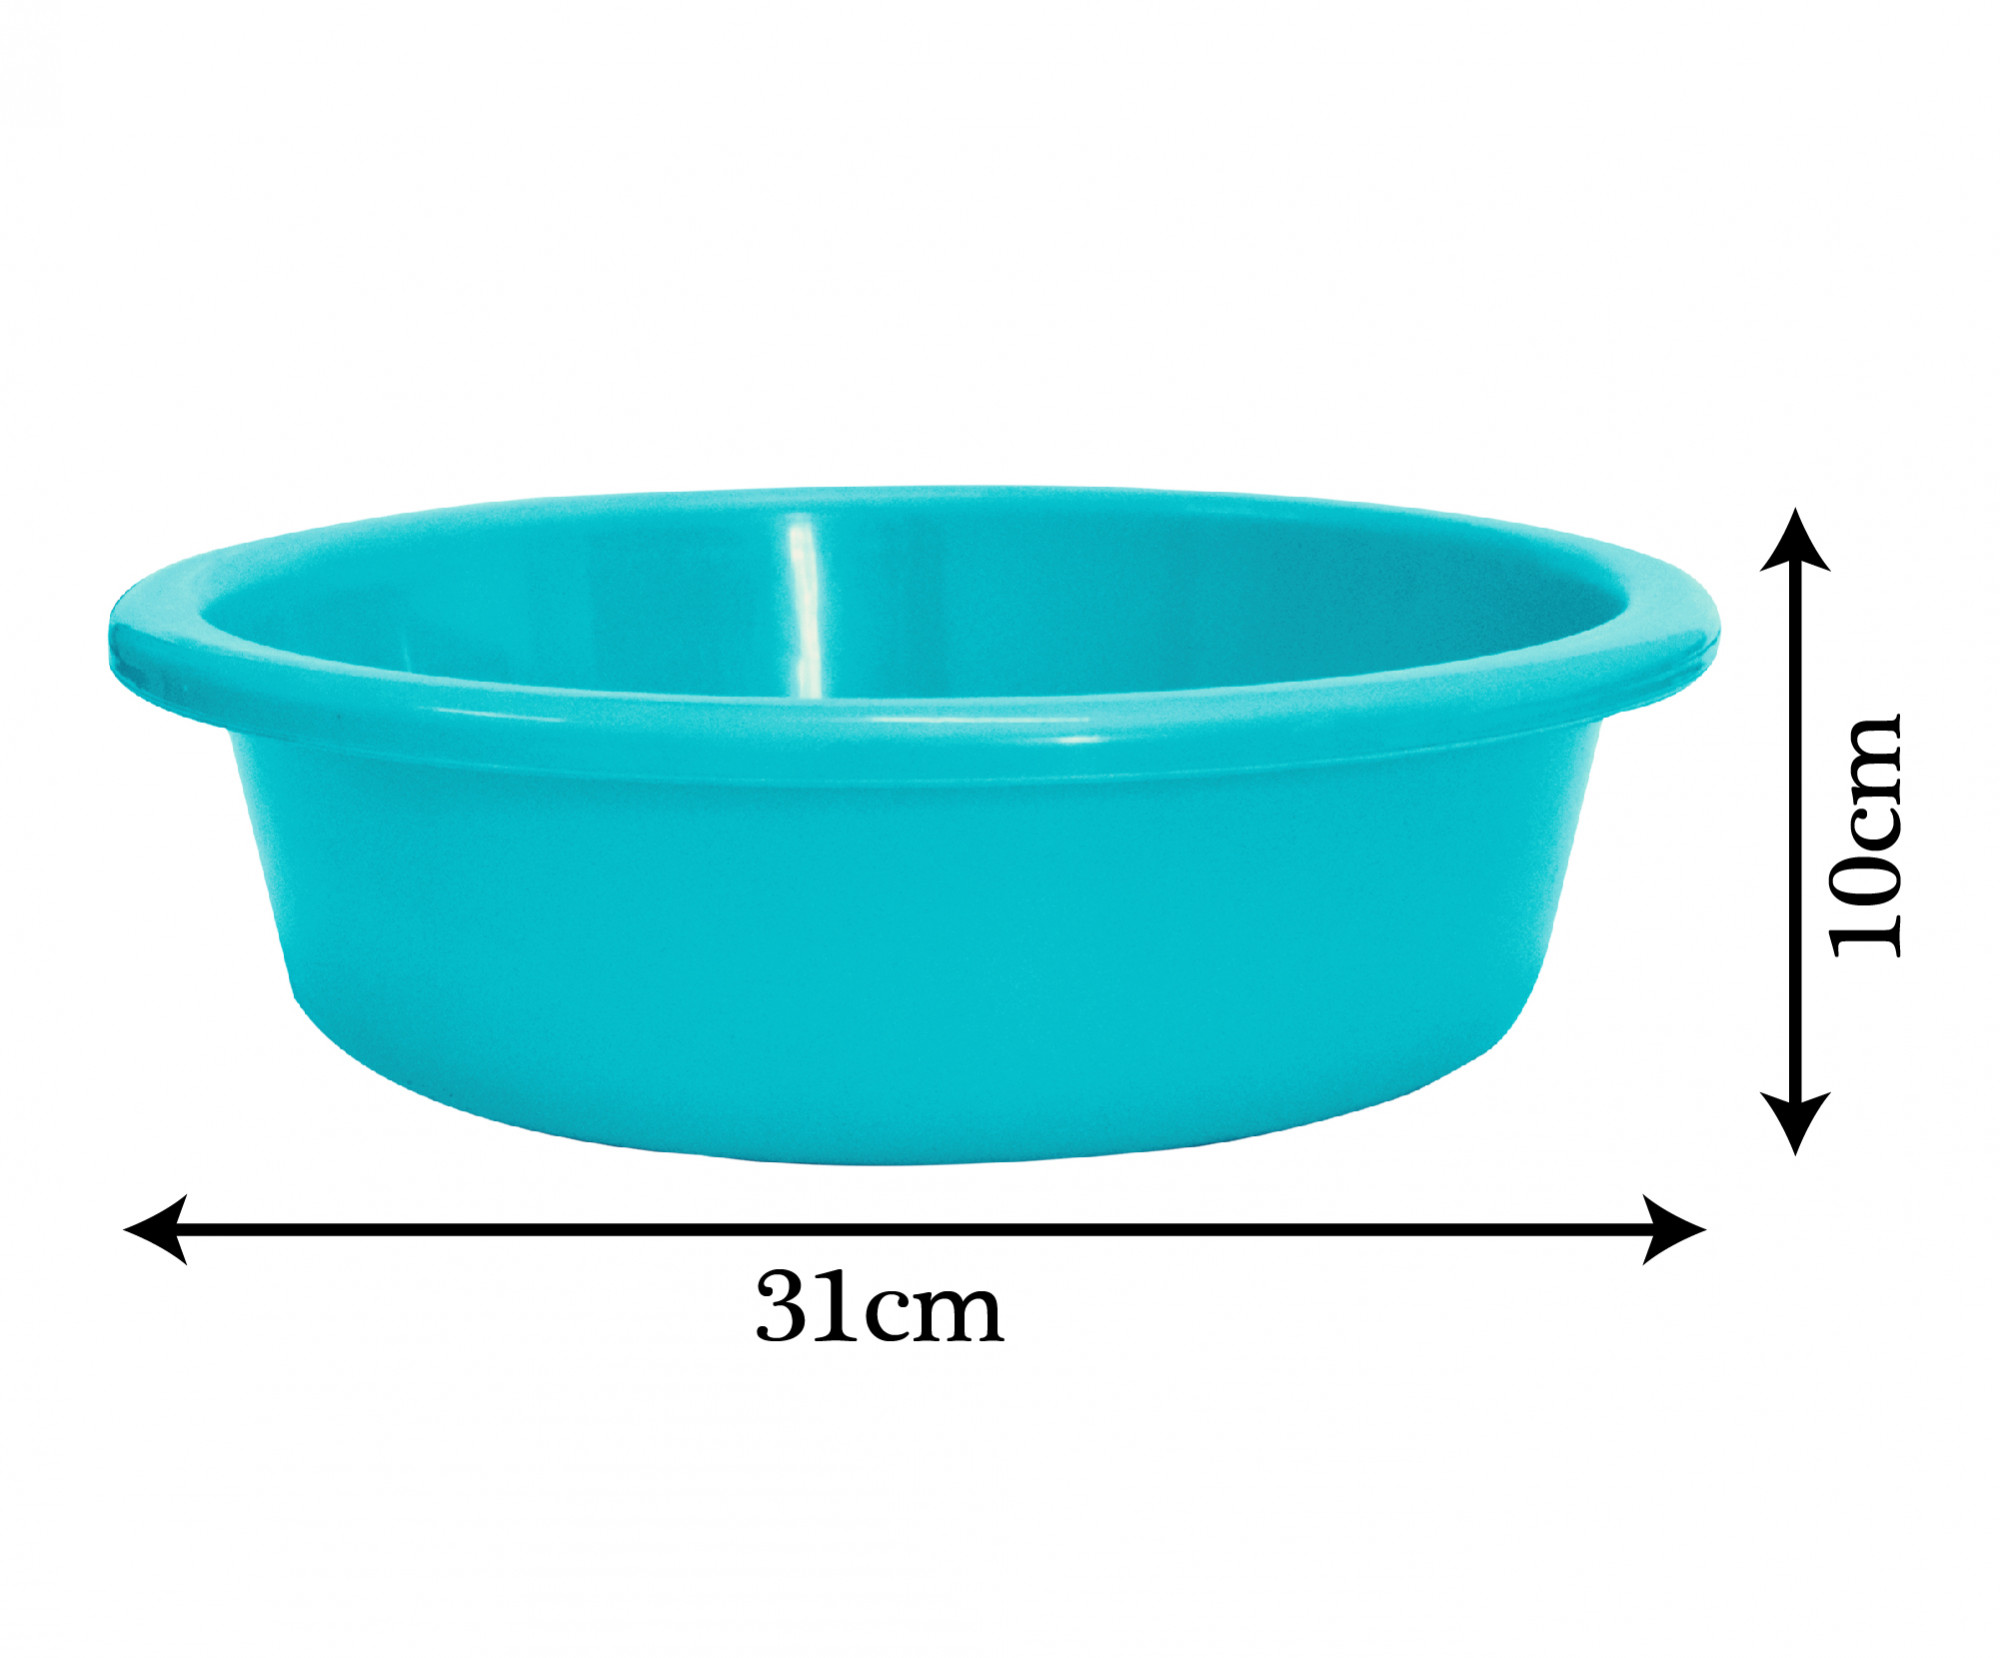 Kuber Industries Multiuses Unbreakable Plastic Knead Dough Basket/Basin Bowl For Home & Kitchen 6 Ltr- Pack of 2 (Purple & Sky Blue)